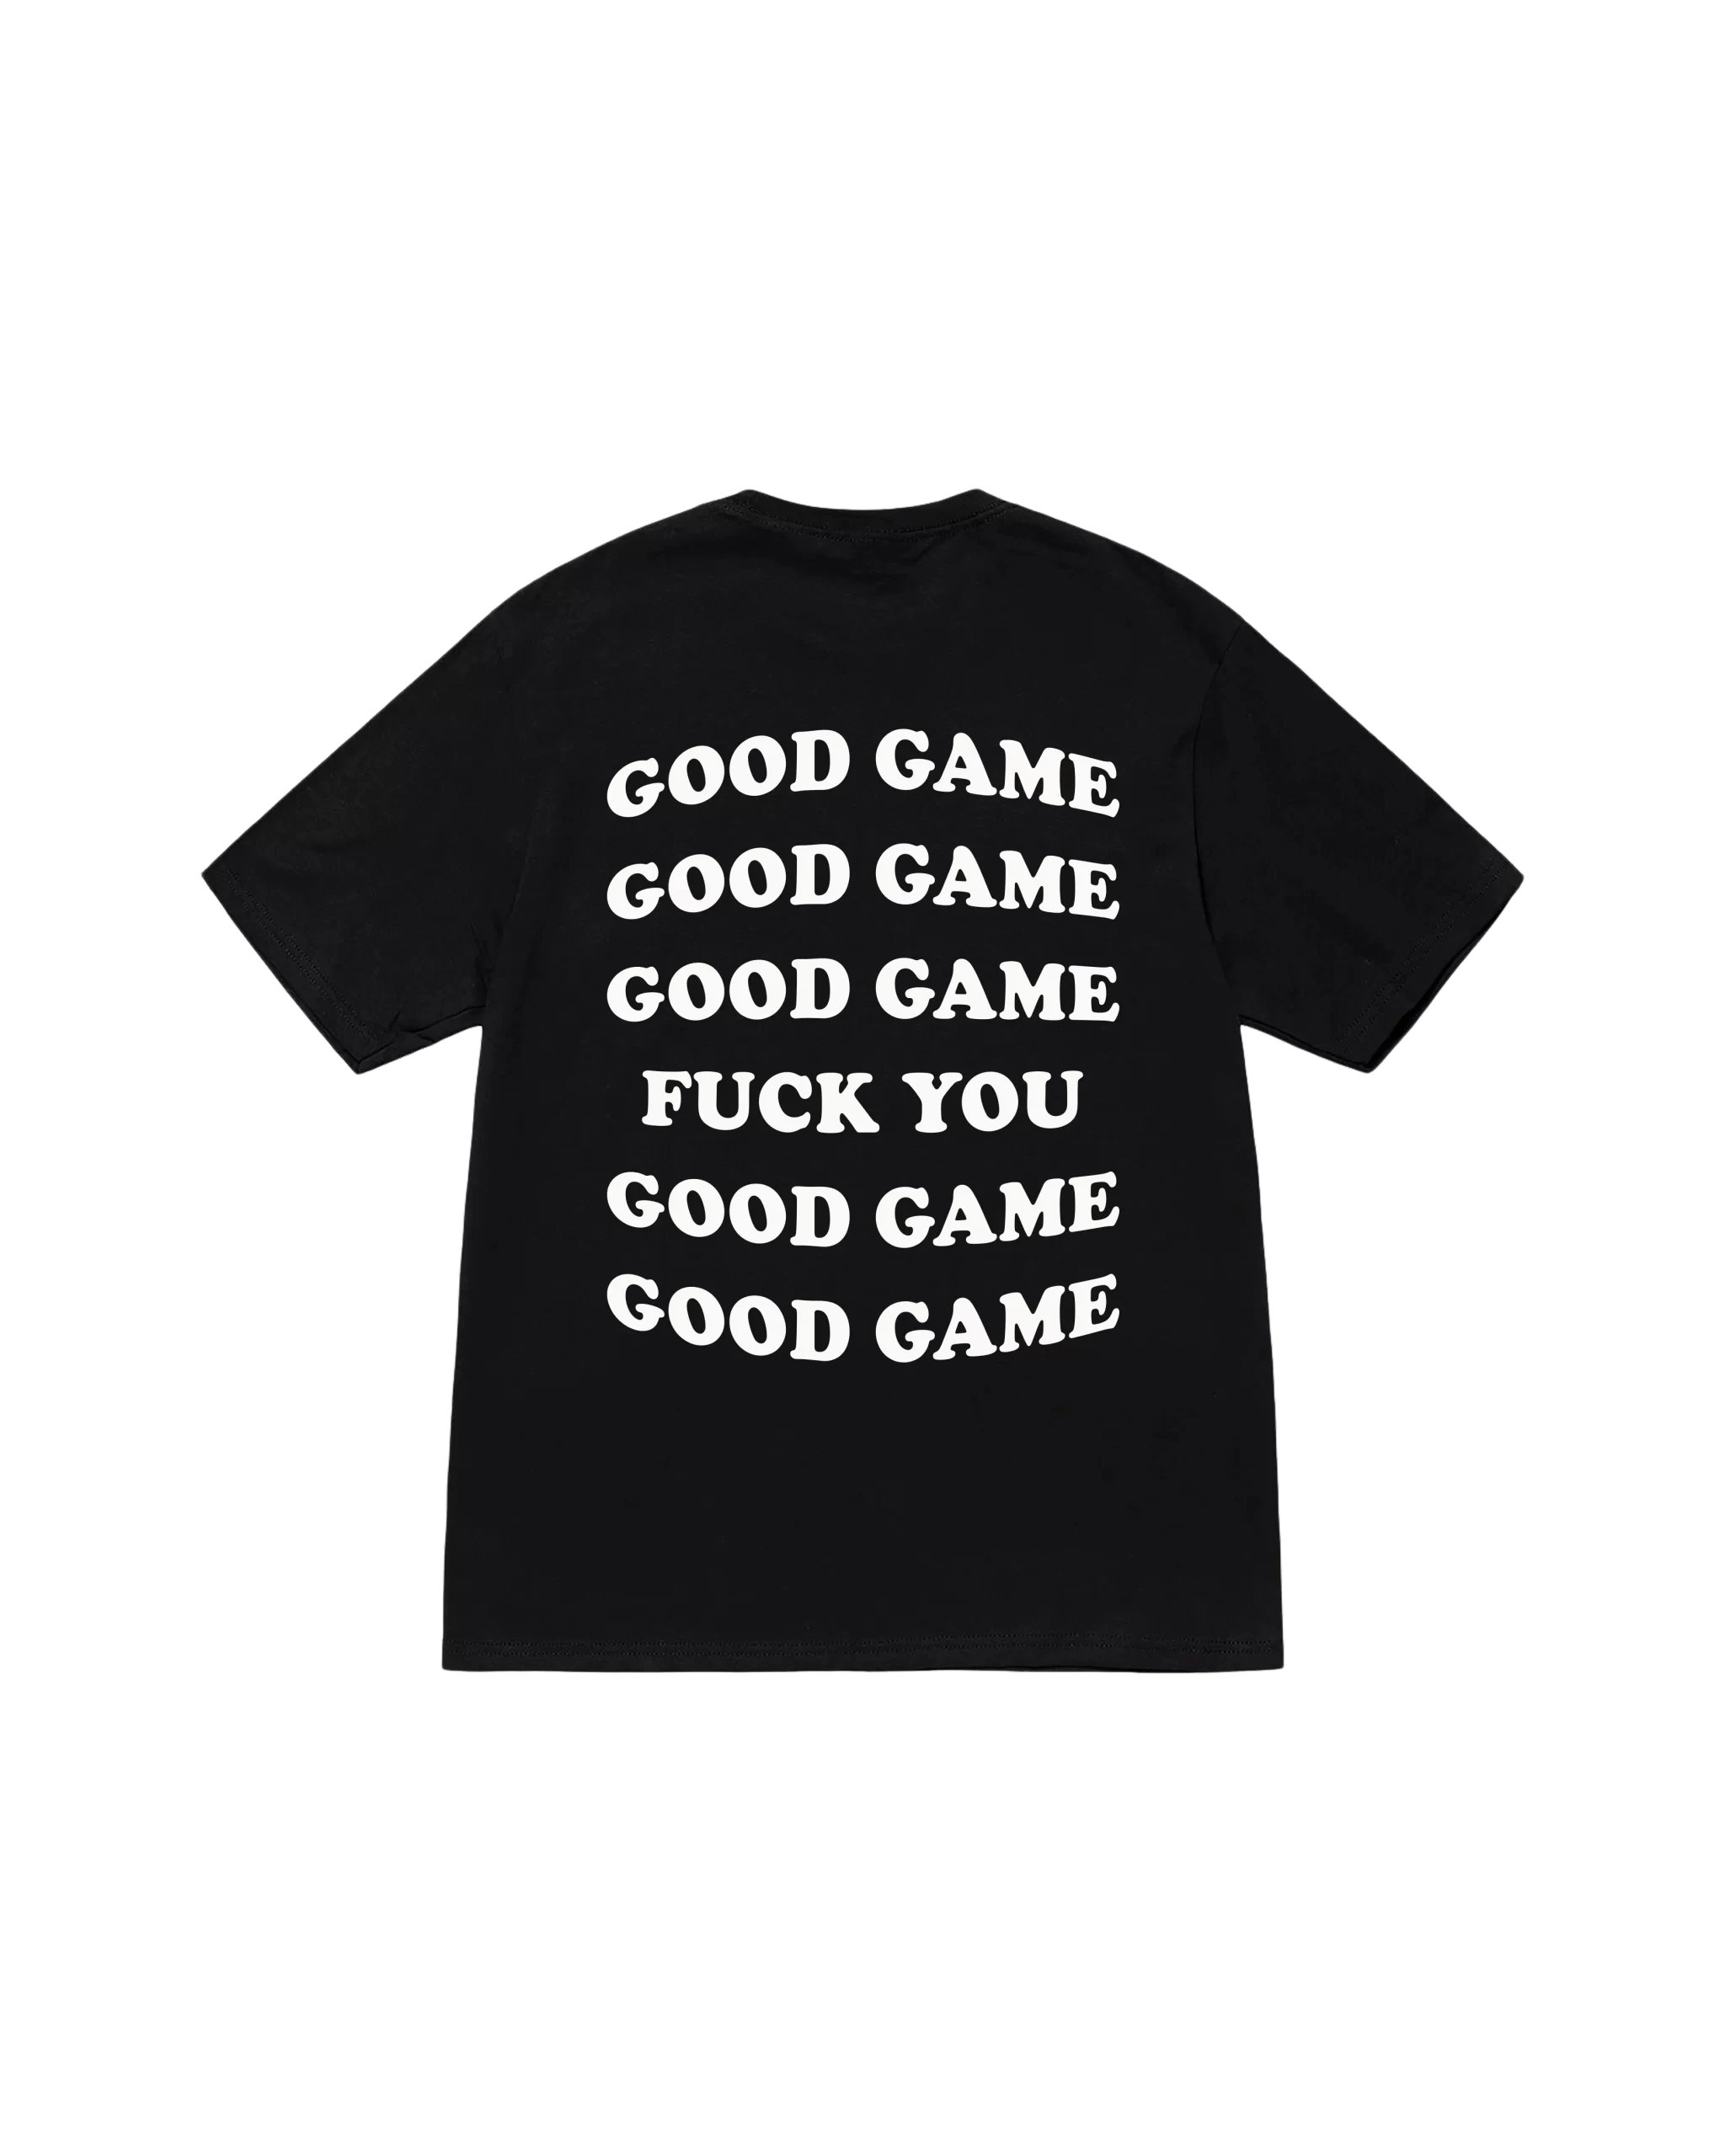 A black Good Game Tee that says good game and game.